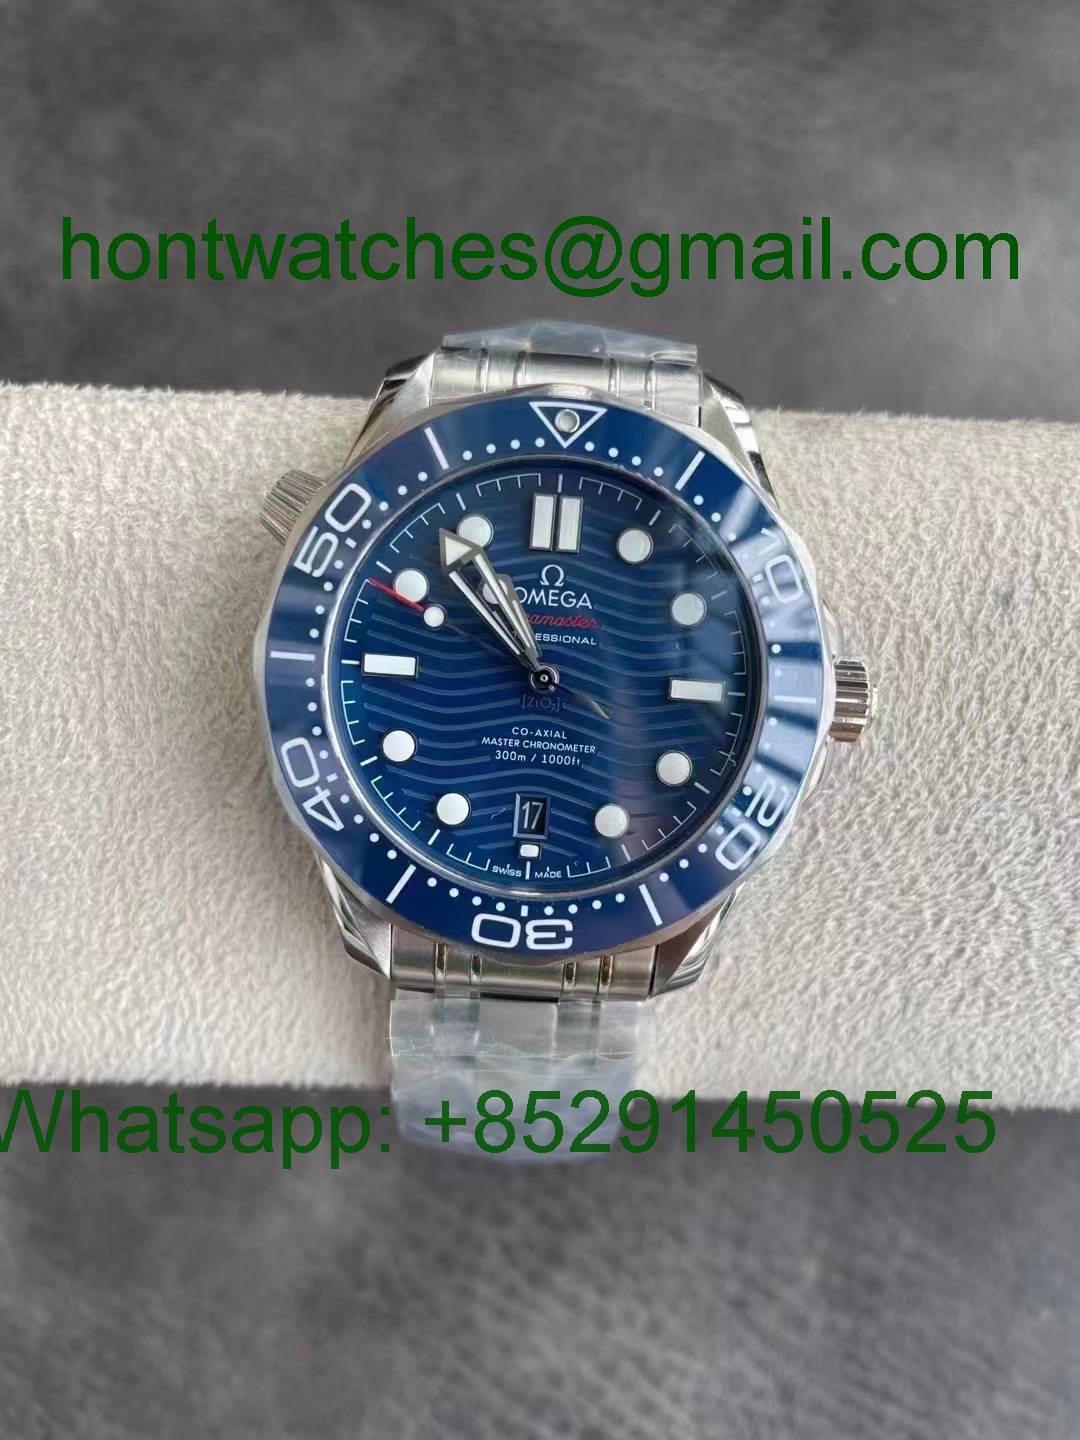 Replica OMEGA Seamaster Diver 300M VSF 1:1 Best Blue Dial V2 Hontwatch Wholesale